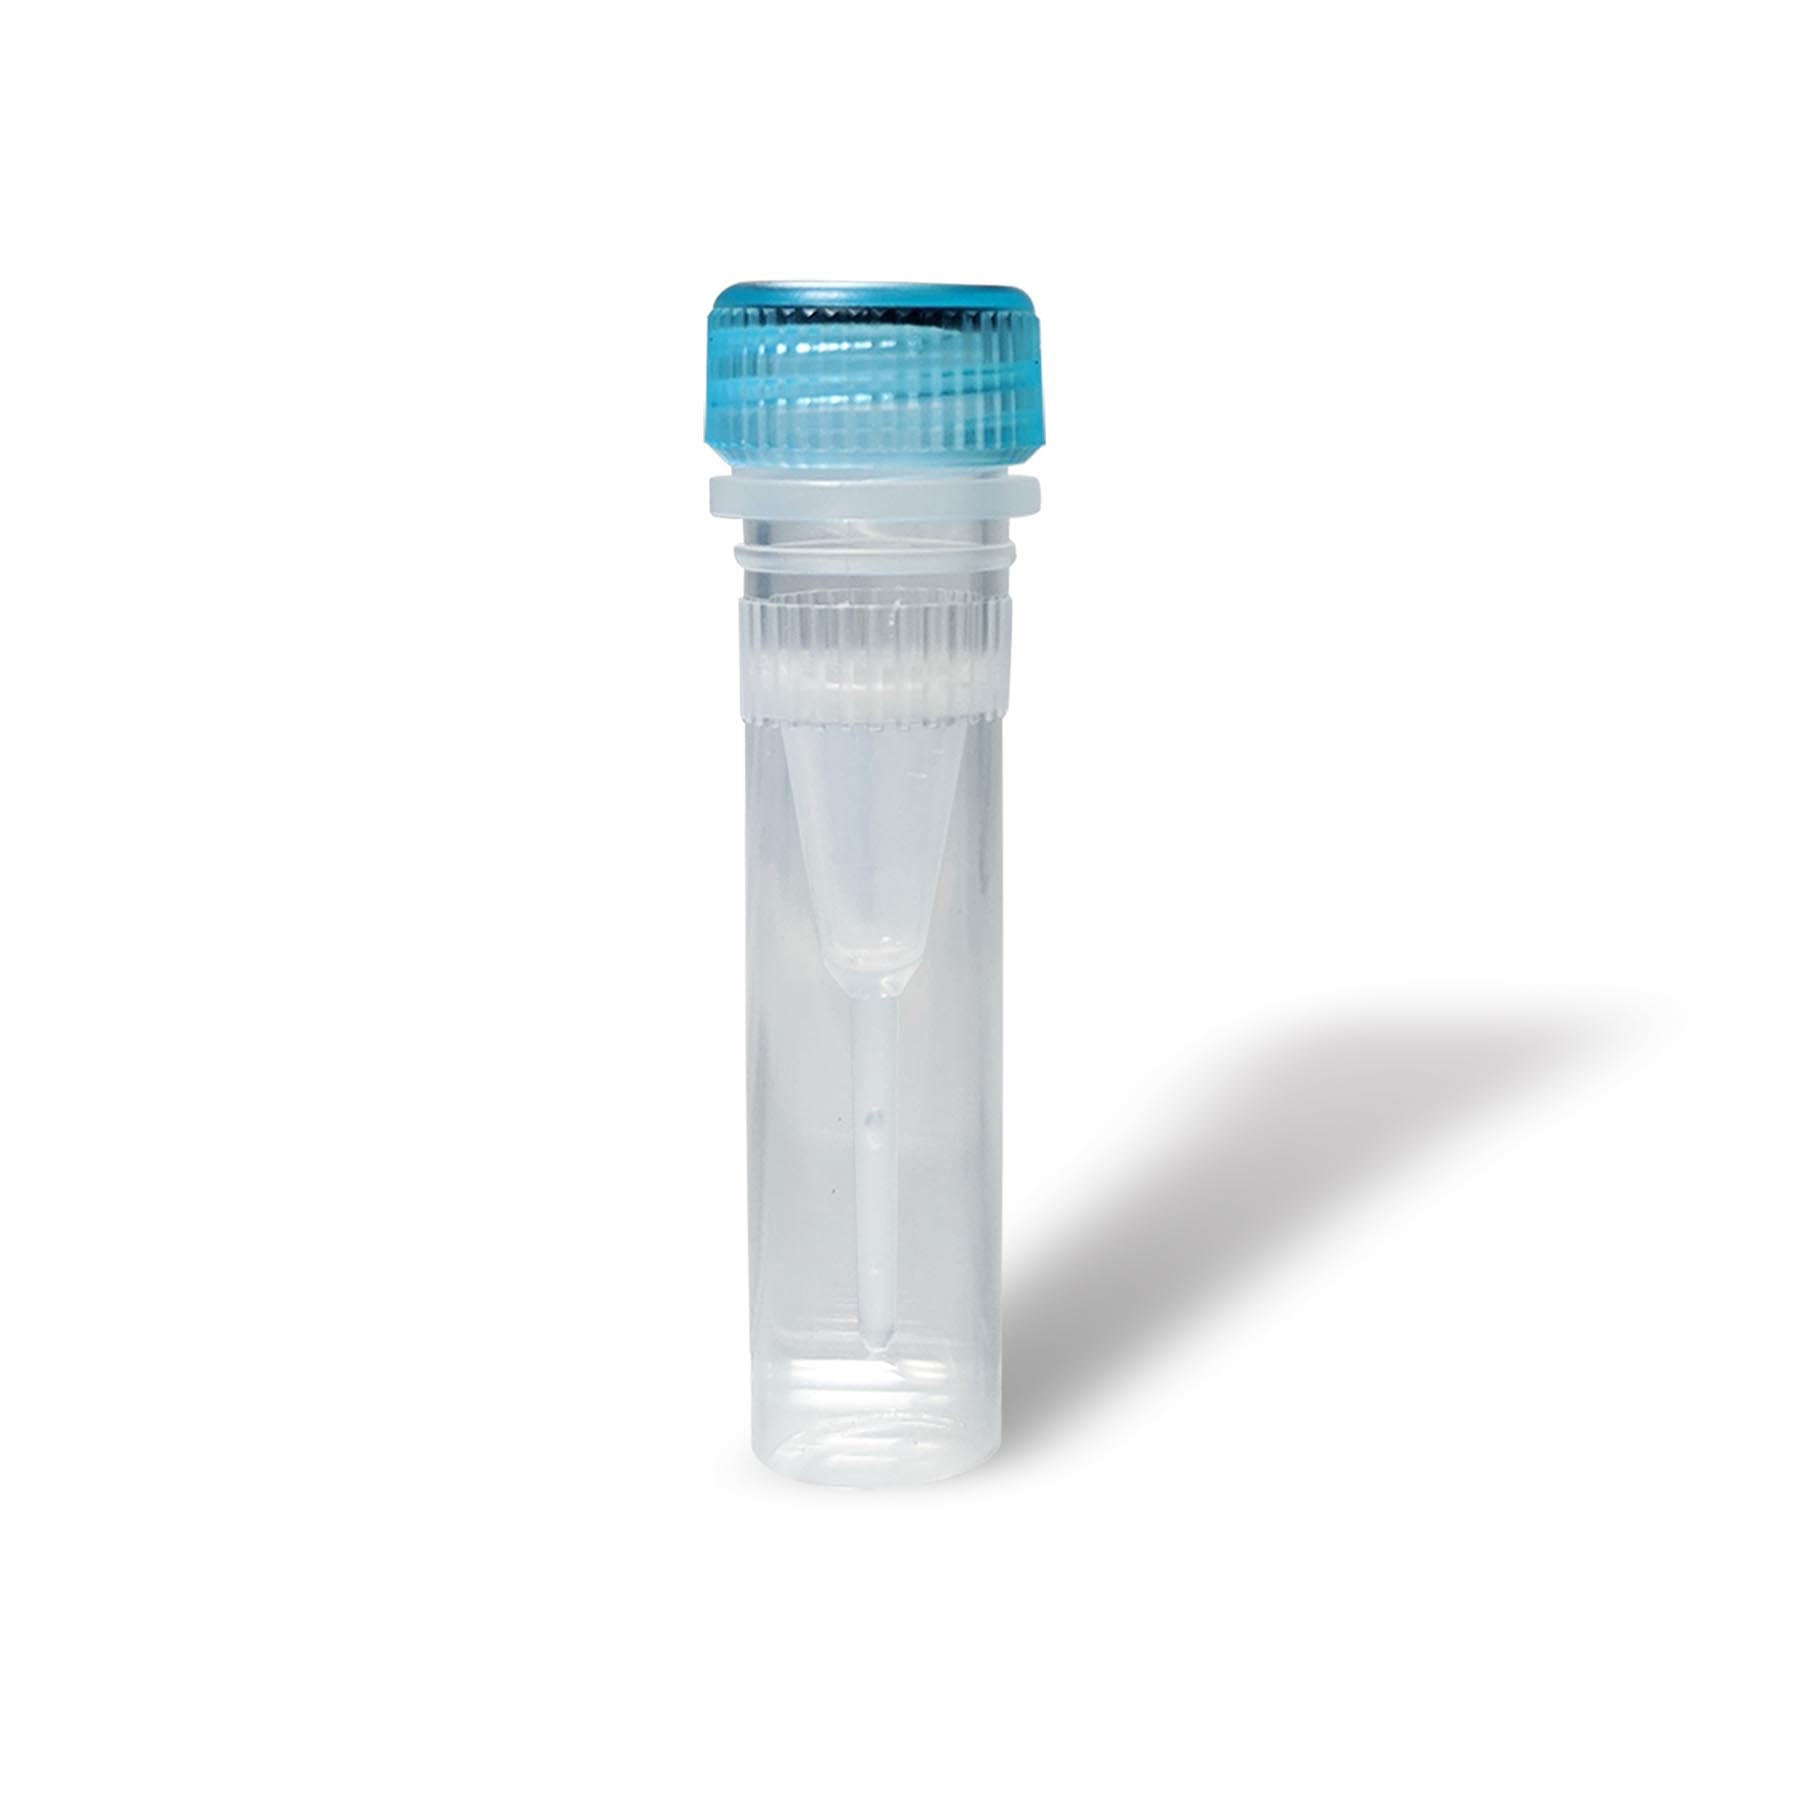 MTC Bio C3205-S, Clearseal Microcentrifuge Tube, 0.5ml, Sterile, Non-Graduated, Self-Standing, 20 Resealable Bags of 50 Tubes, 1000/cs